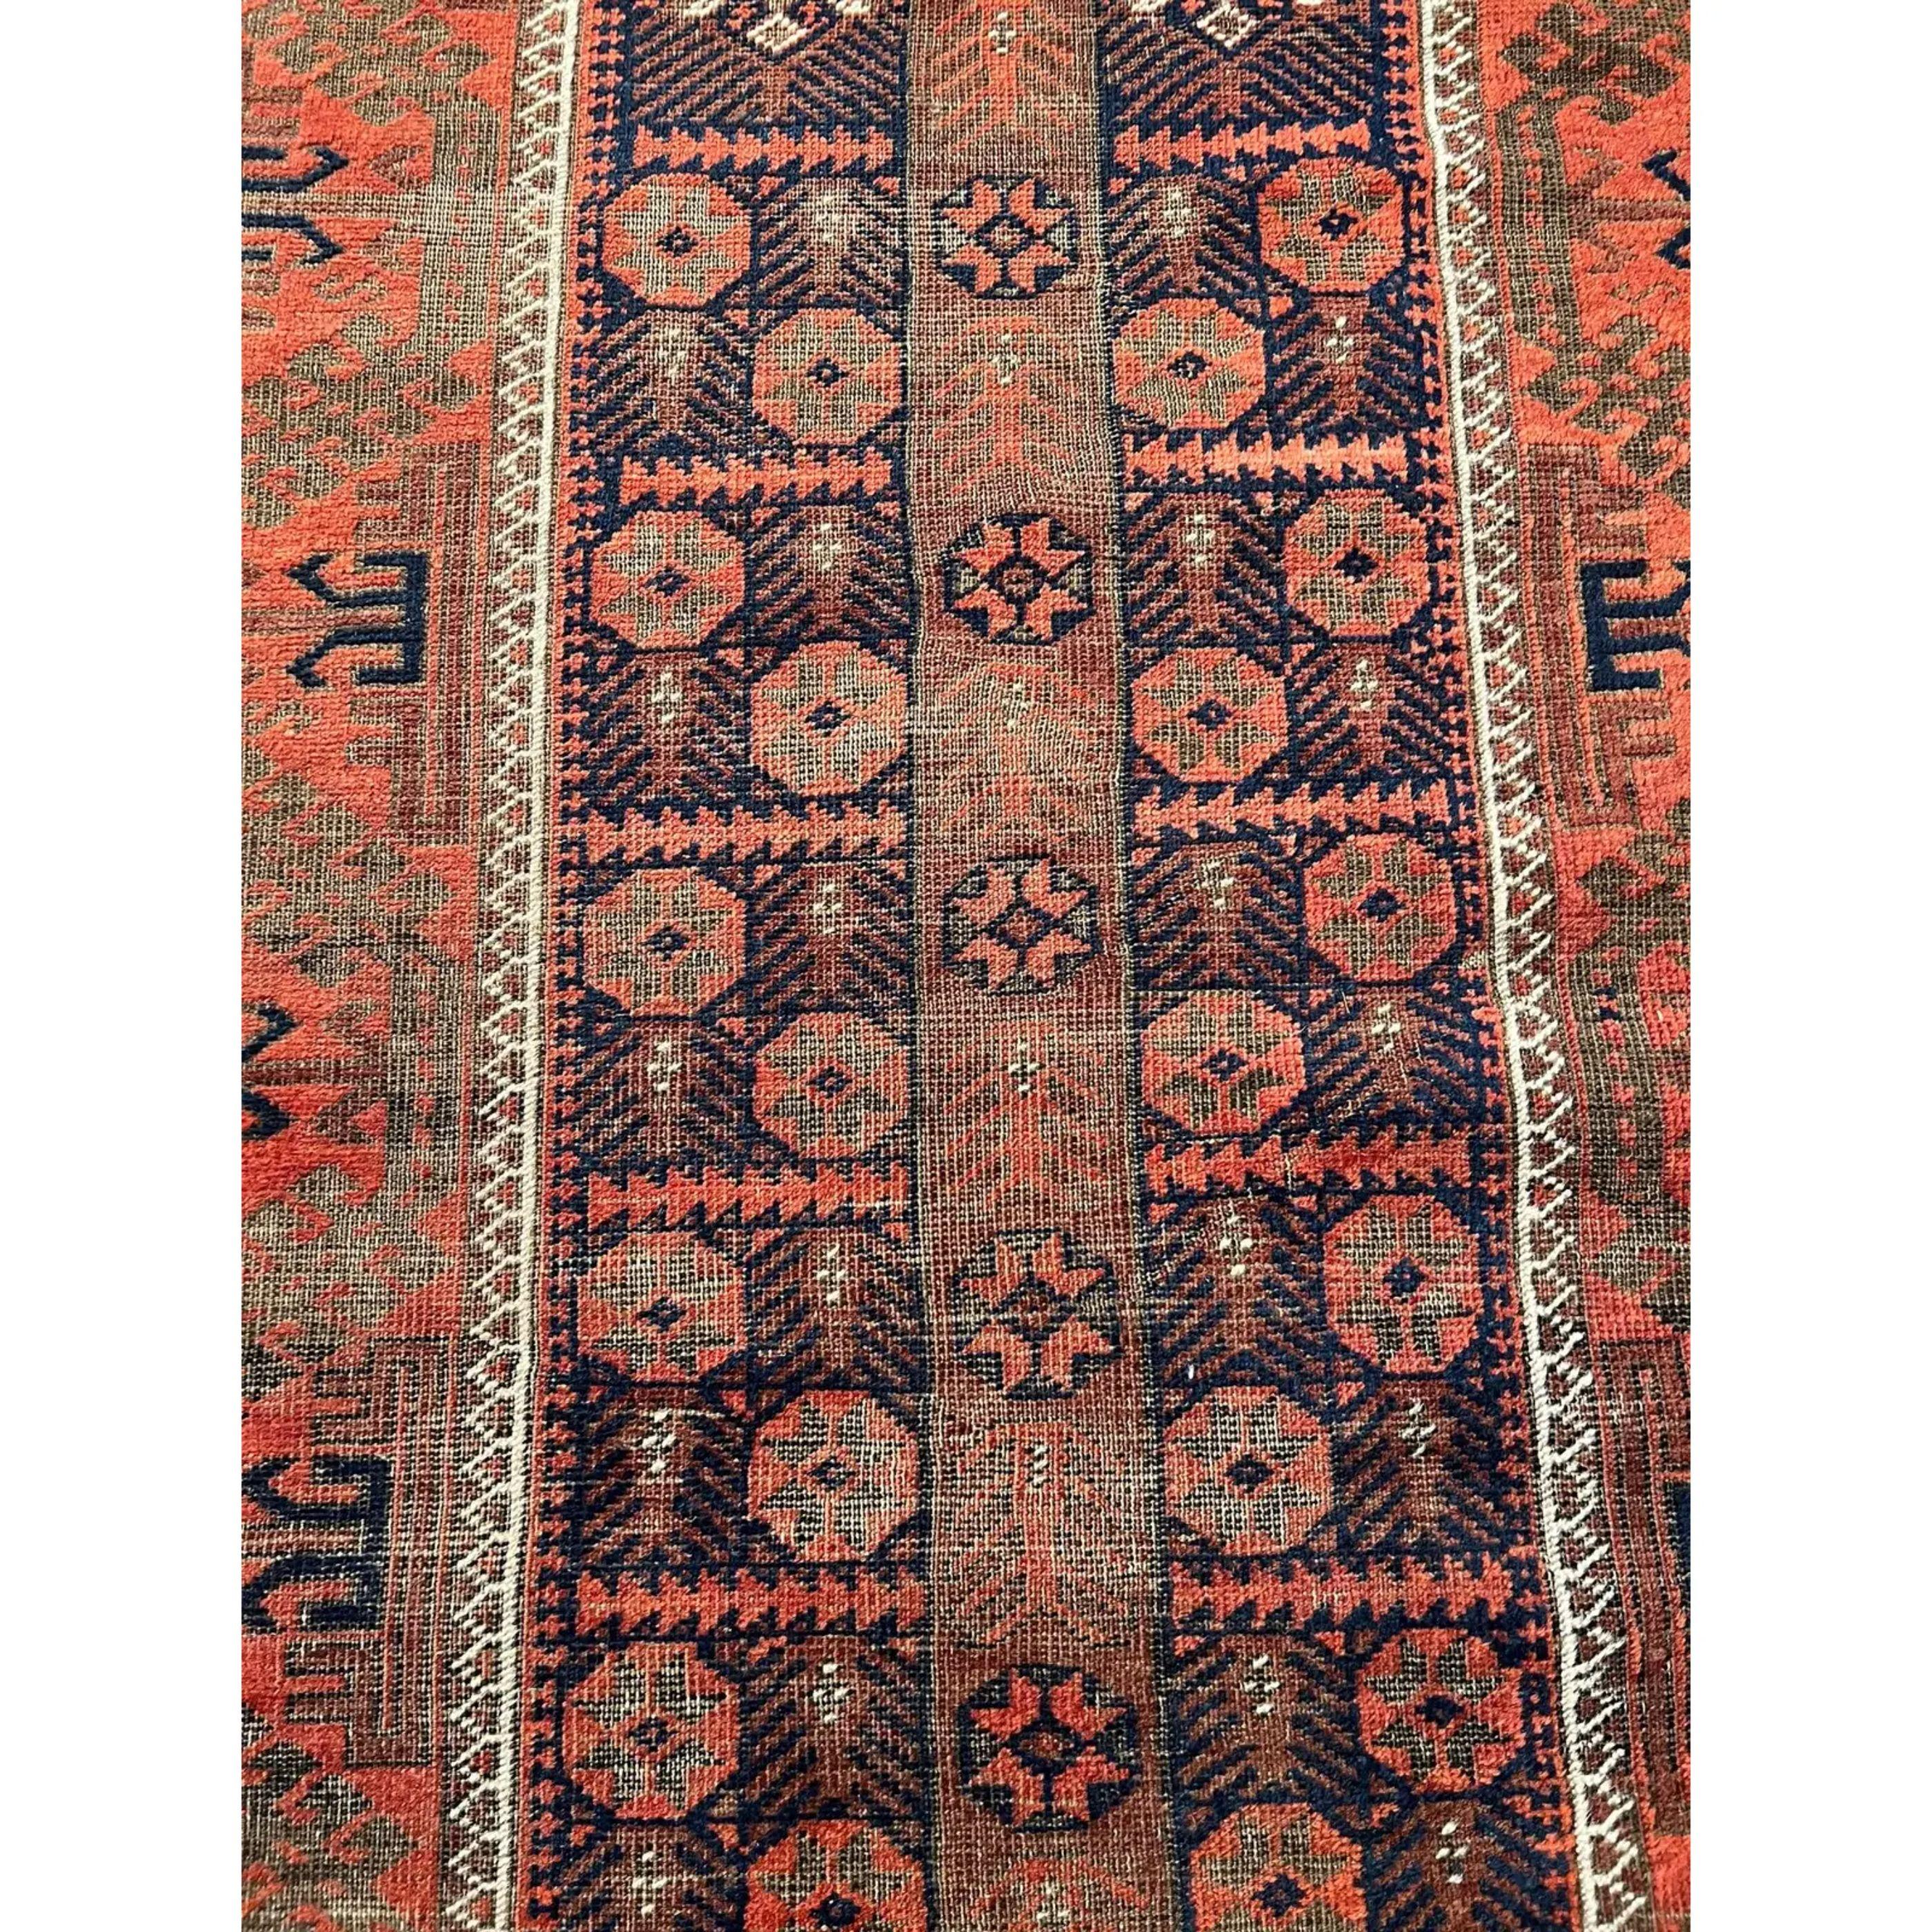 1900s Antique Persian Baluch Rug, handmade and hand-knotted